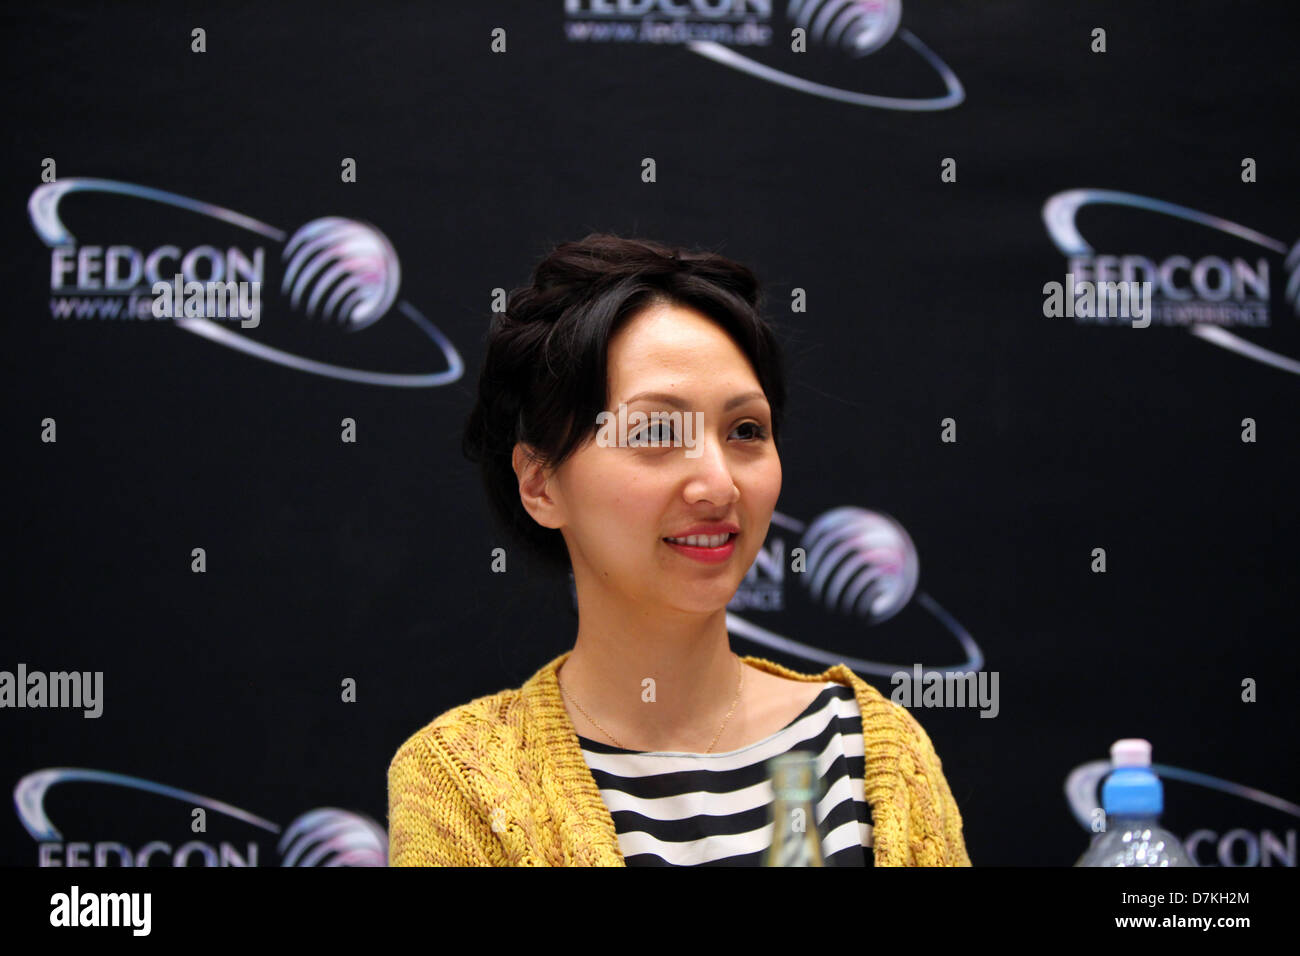 Duesseldorf, Germany, 09 May 2013. Actress Linda Park (Star Trek Enterprise) takes part in a press conference at Fedcon 2013 in Duesseldorf, Germany, 09 May 2013. Fedcon (Federal Convention) is one of the largest science fiction conventions in Europe. Photo: Susannah V. Vergau/DPA/Alamy Live News Stock Photo